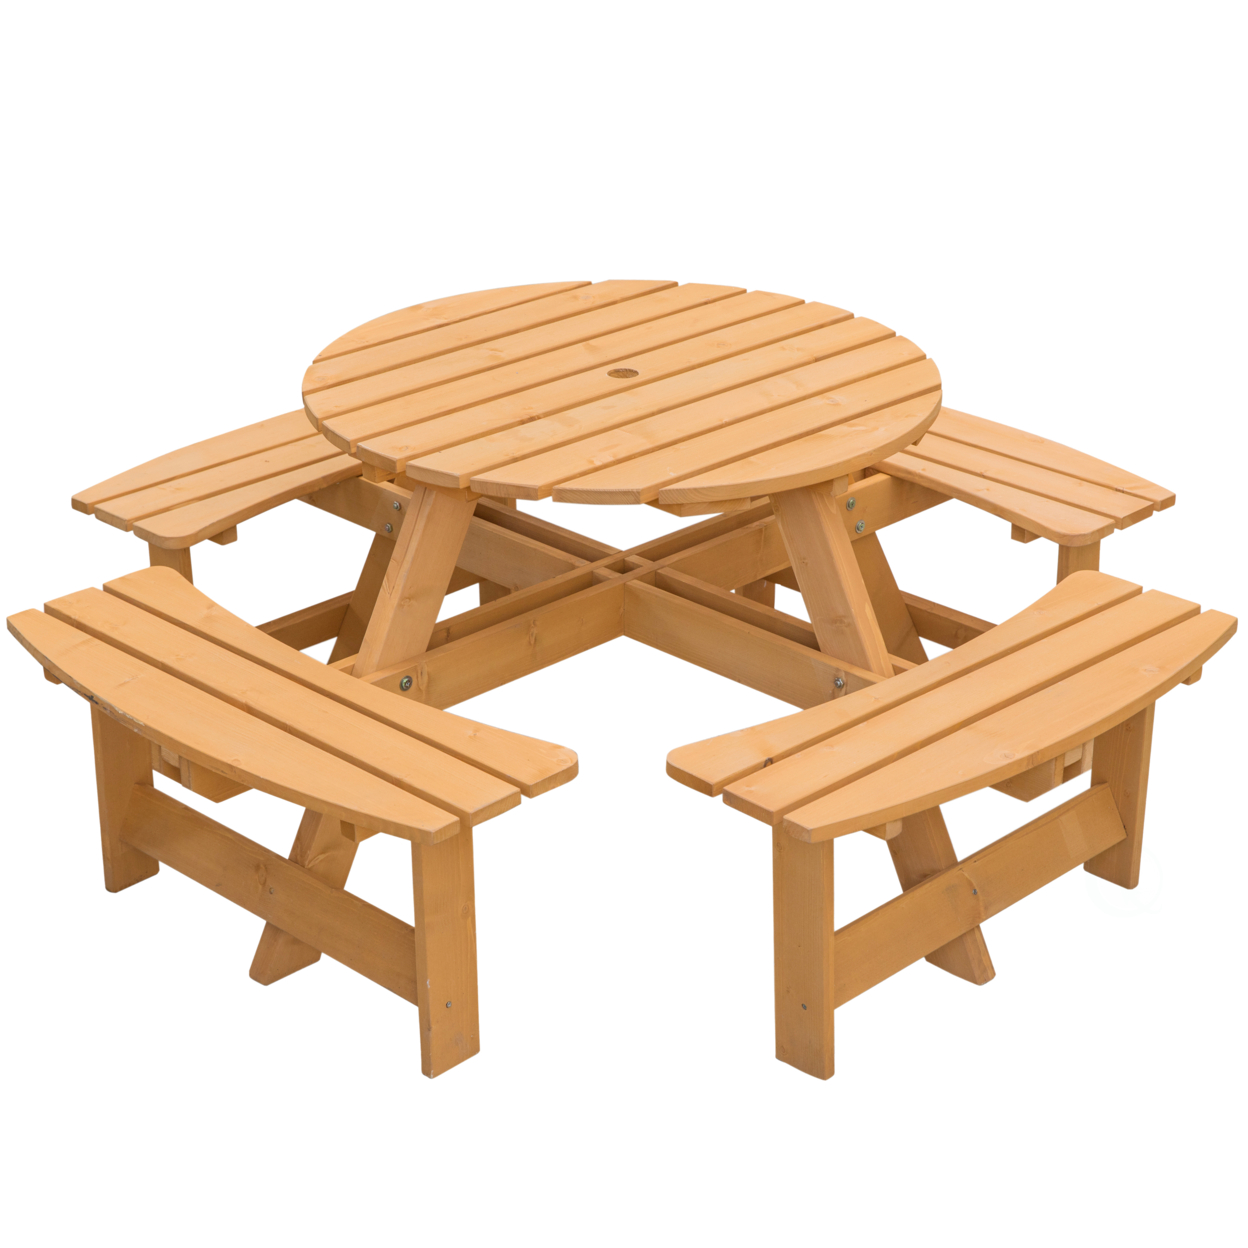 Wooden Outdoor Patio Garden Round Picnic Table with Bench, 8 Person - image 3 of 10